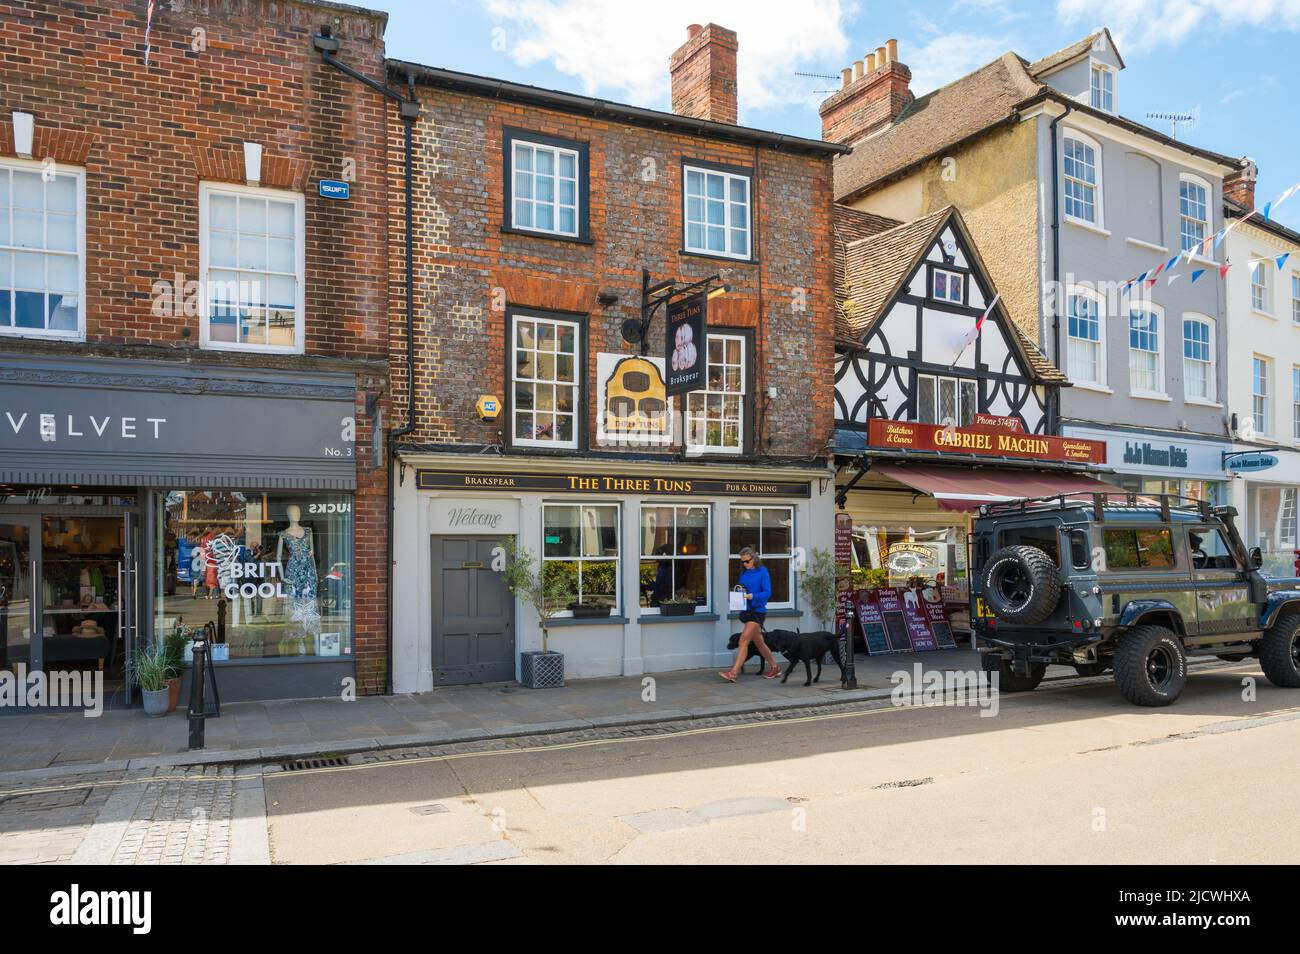 The Three Tuns pub. A woman with two black Labrador dogs on leads walks past. Market Place, Henley on Thames, Oxfordshire, England, UK. Stock Photo